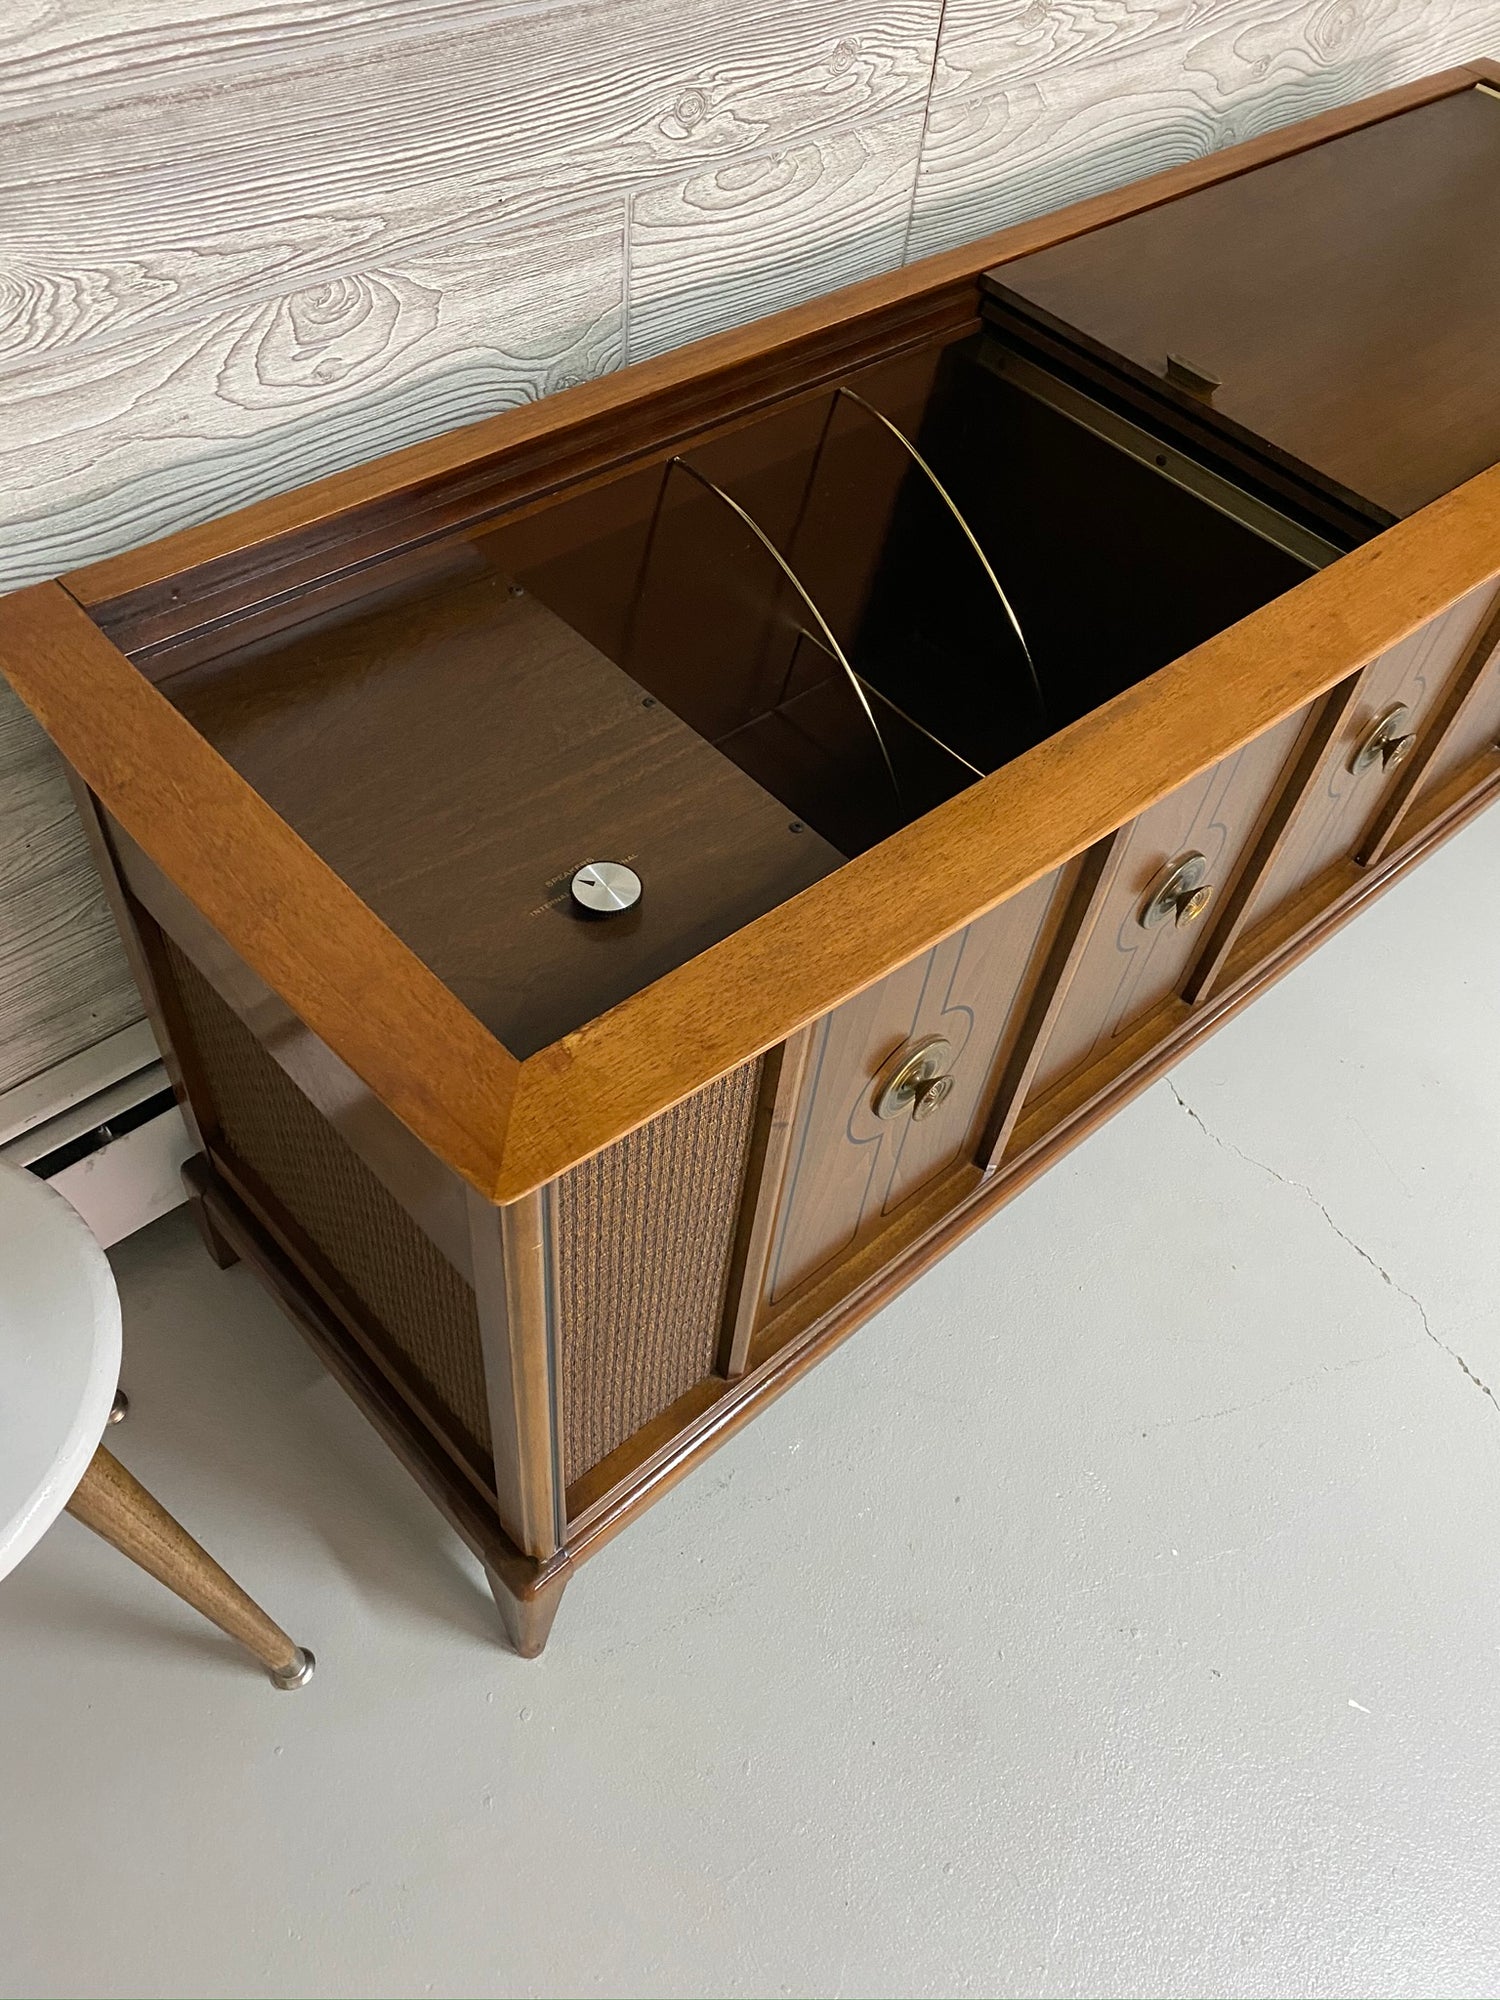 **SOLD OUT**  MAGNAVOX Vintage Stereo Console 60s Record Player Changer AM FM Bluetooth Alexa The Vintedge Co.